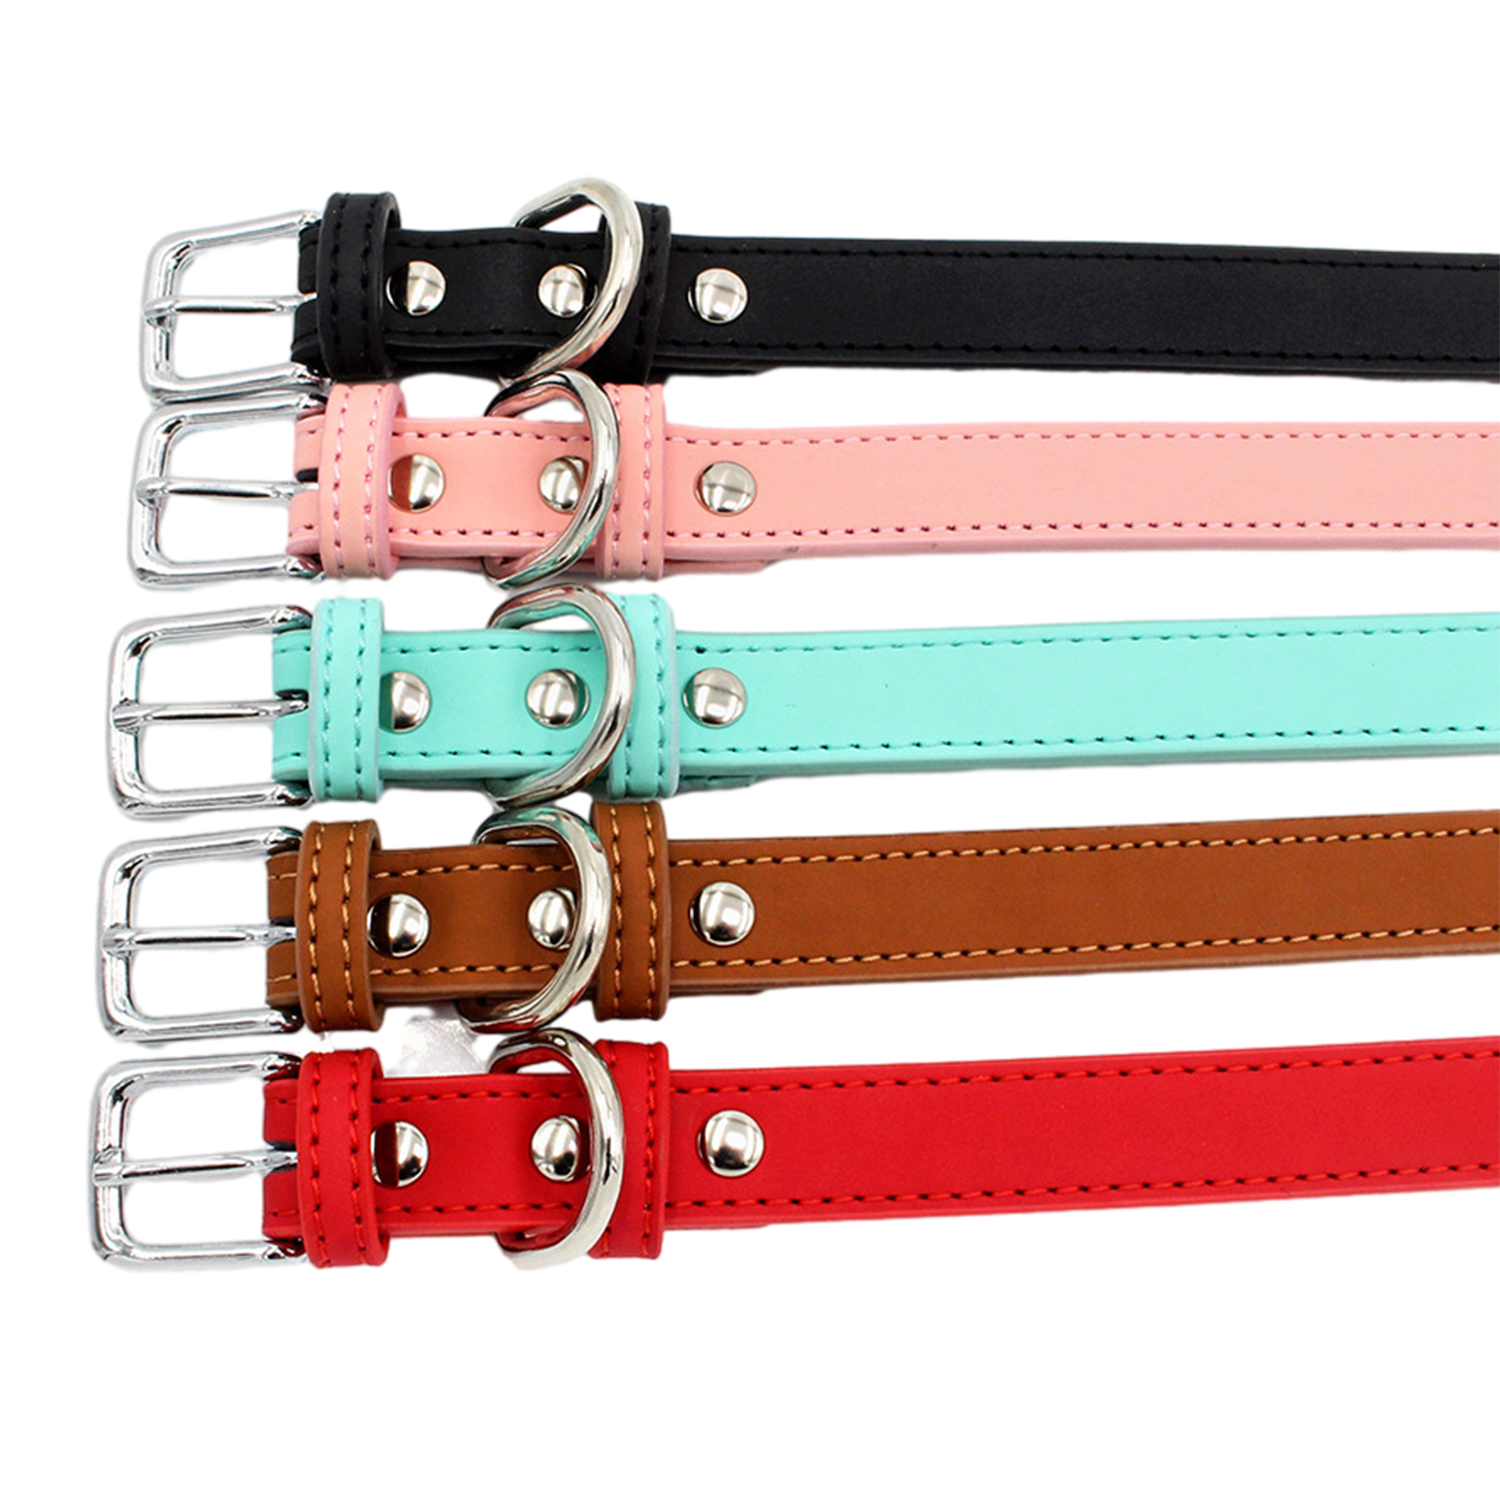 PU Small Dogs Collars XS-M Adjustable Zinc Alloy Solid Color Puppy Collar Comfortable Durable Pets Supplies Accessories